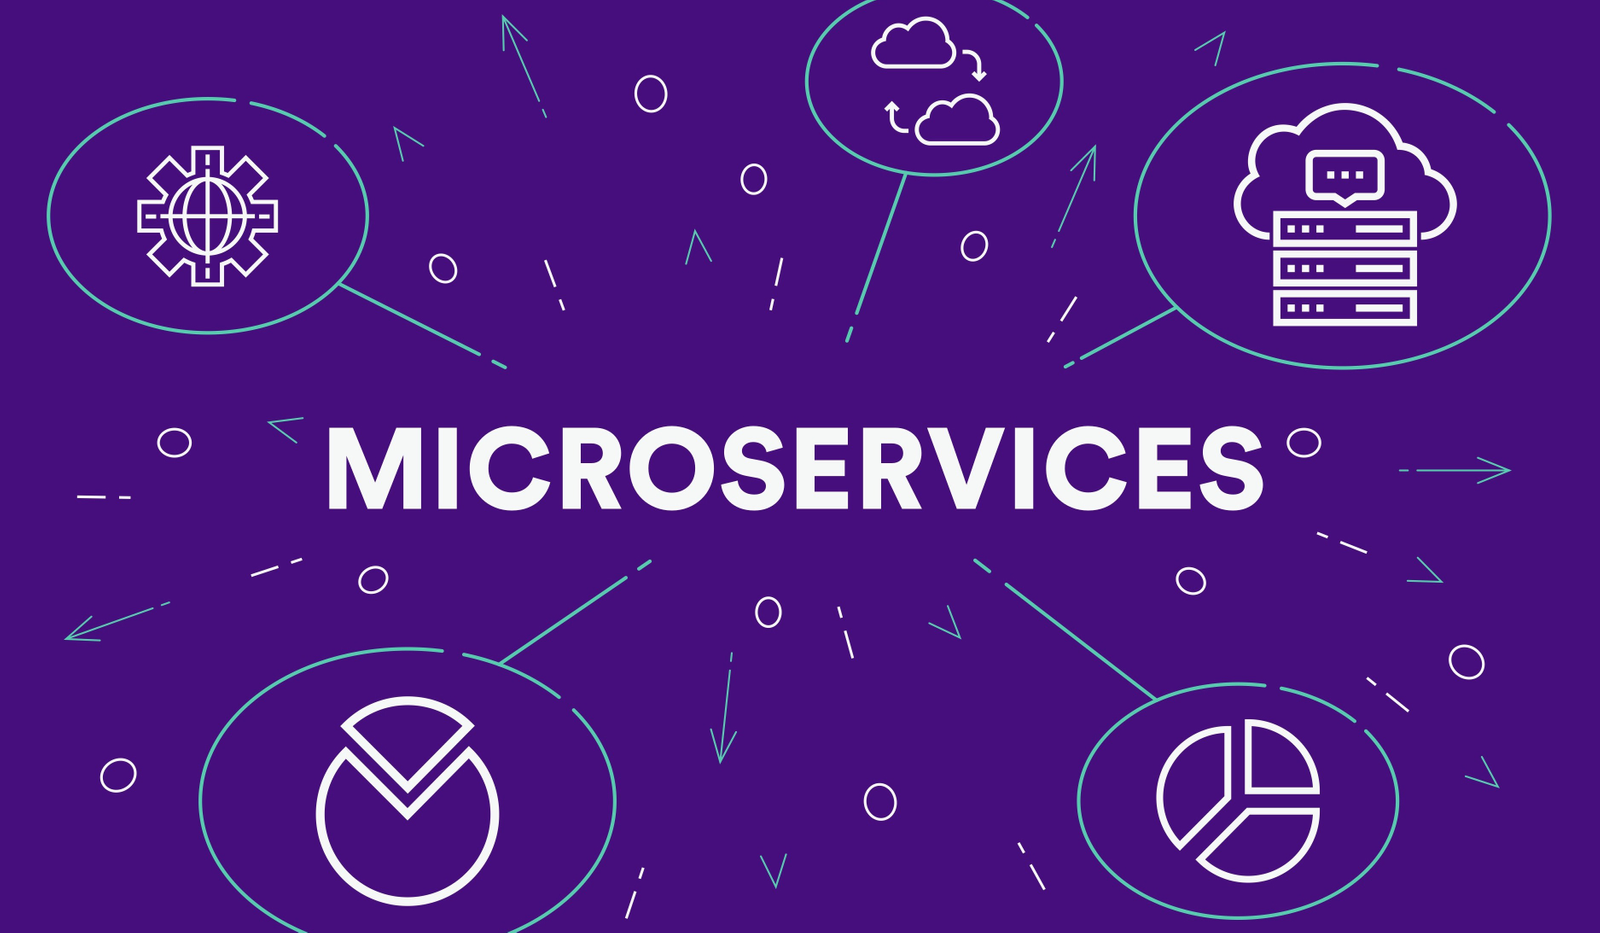 Evolution of Microservices